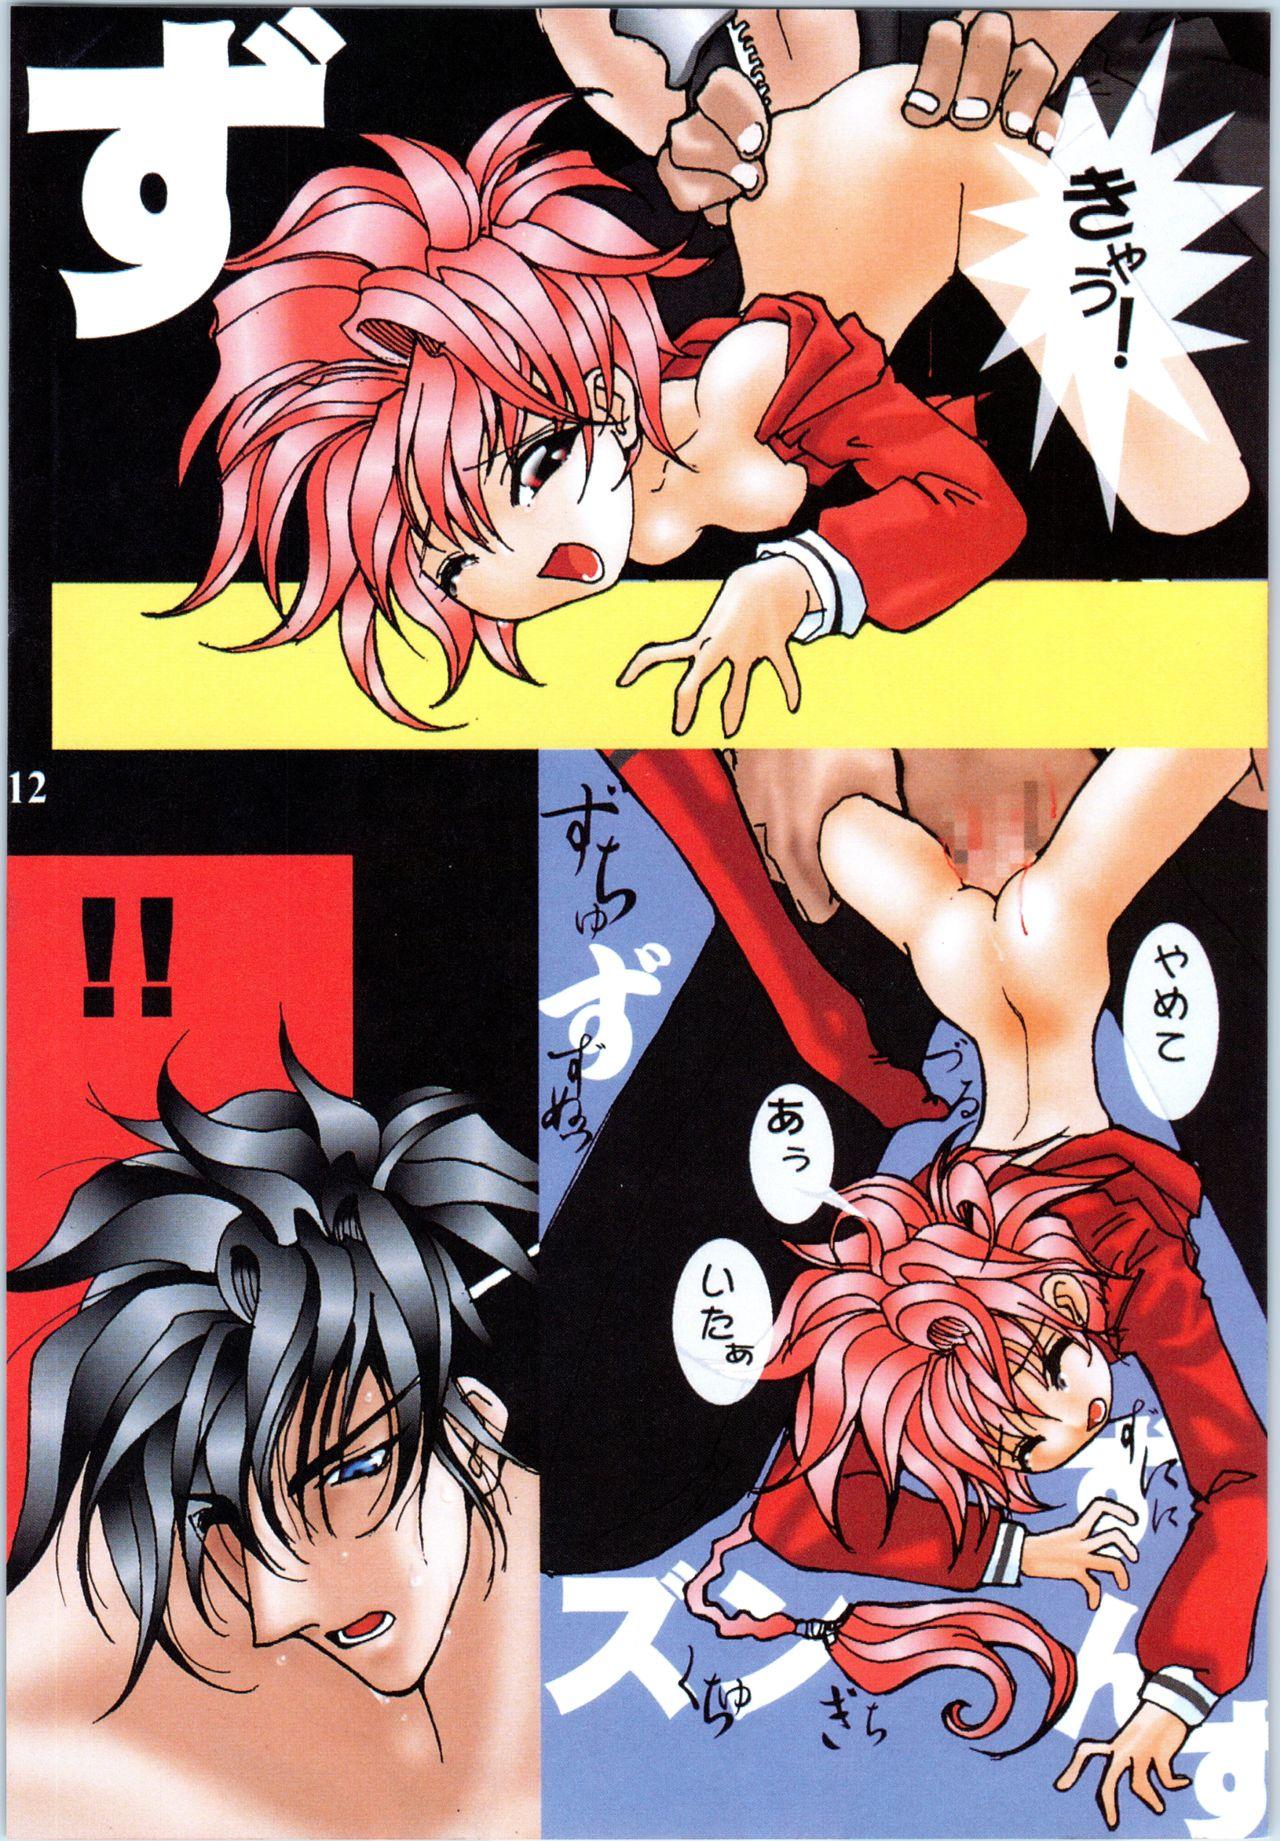 Transex Cool Breaker - Magic knight rayearth Squirt - Page 11